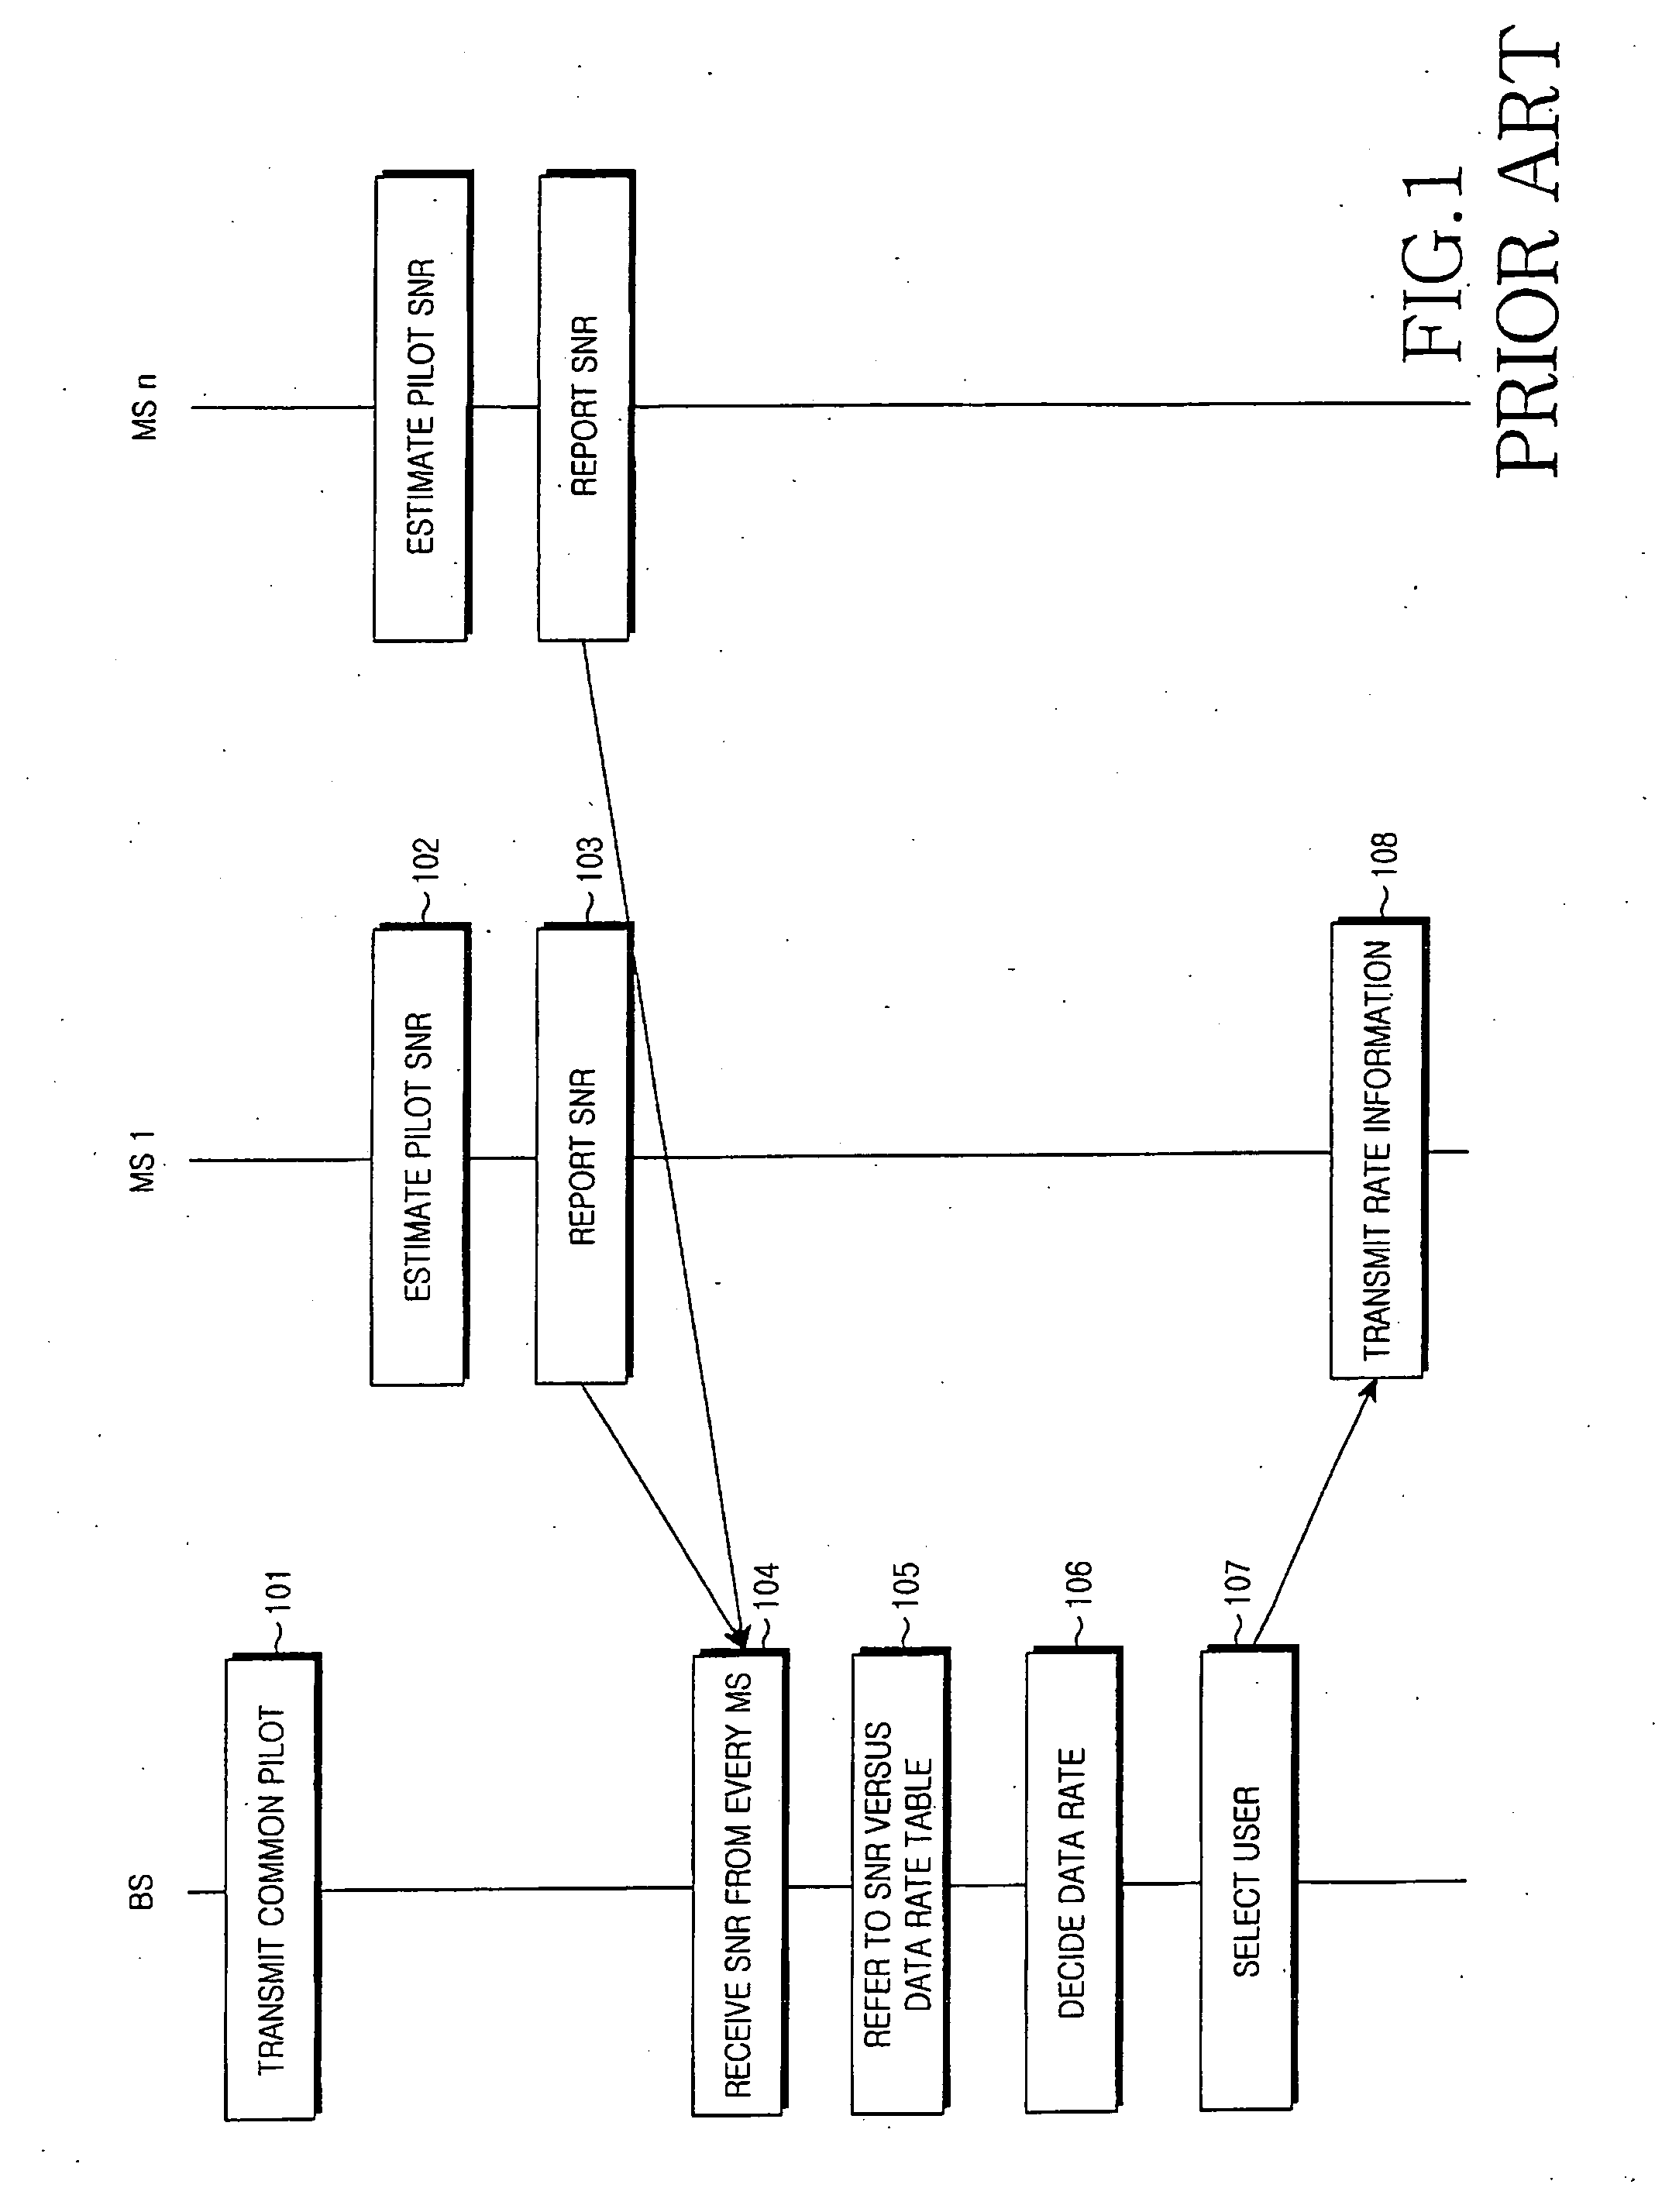 Method and apparatus for determining a data rate